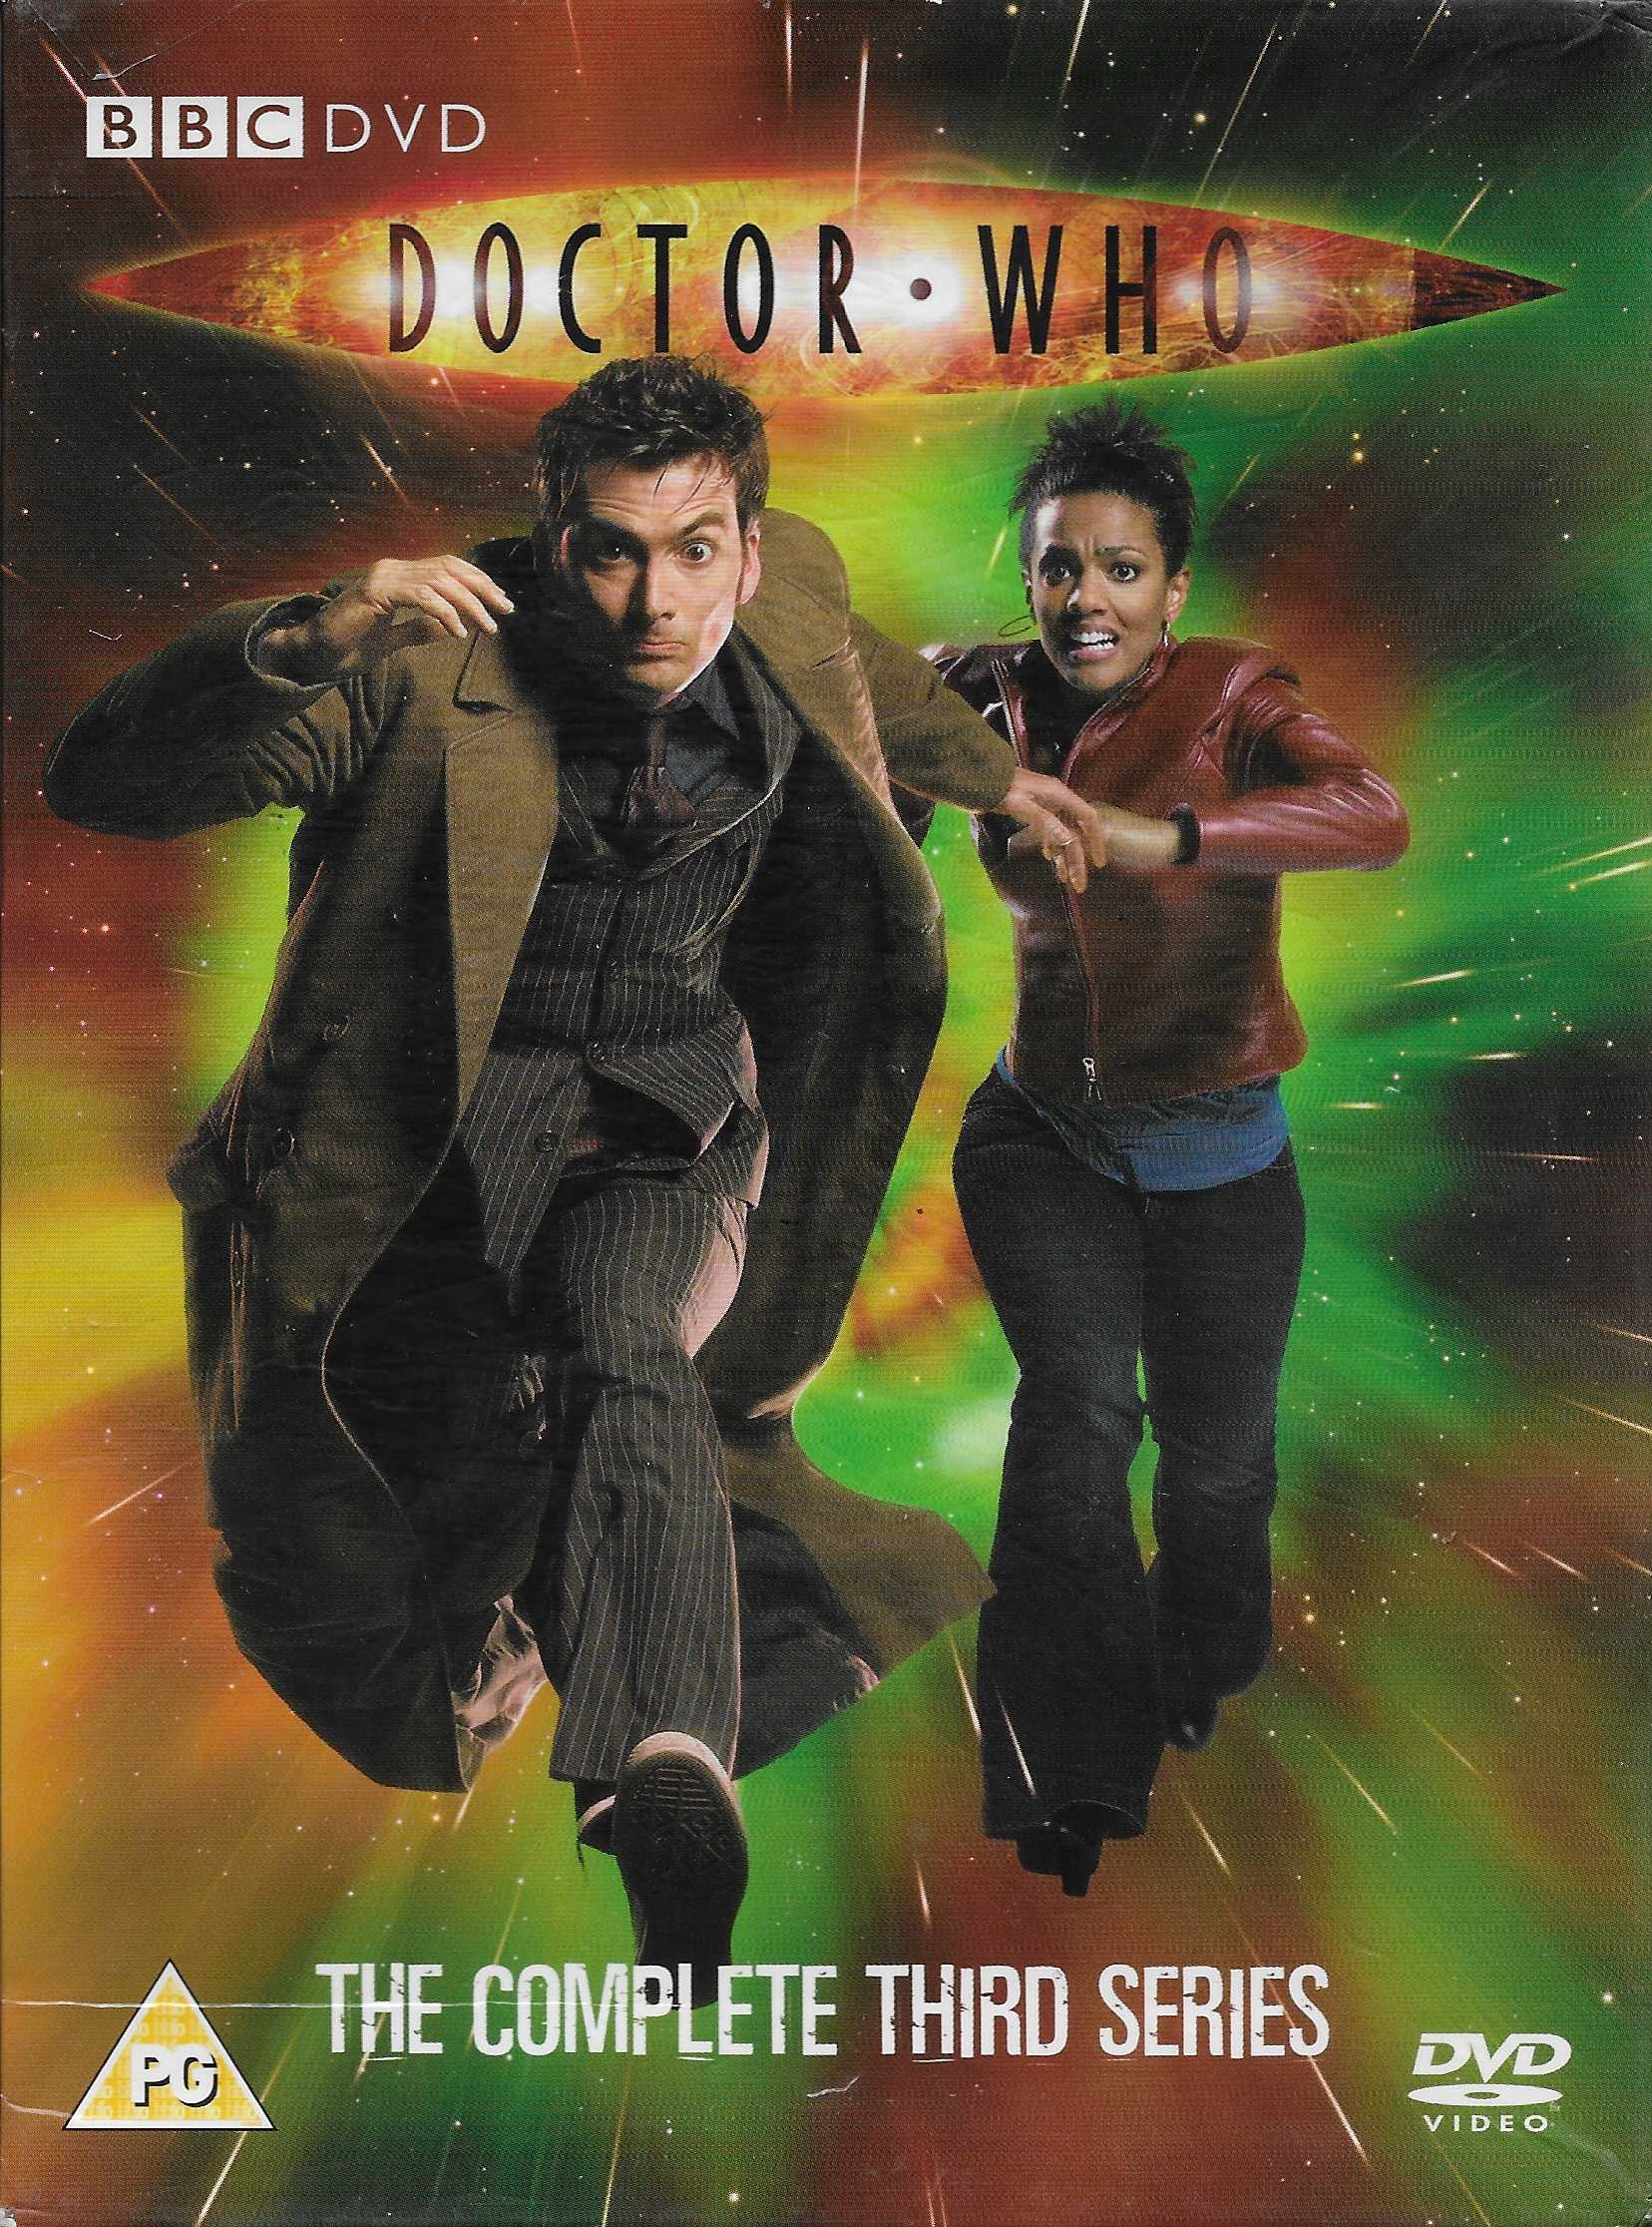 Picture of BBCDVD 2539 Doctor Who - Series 3 by artist Various from the BBC records and Tapes library